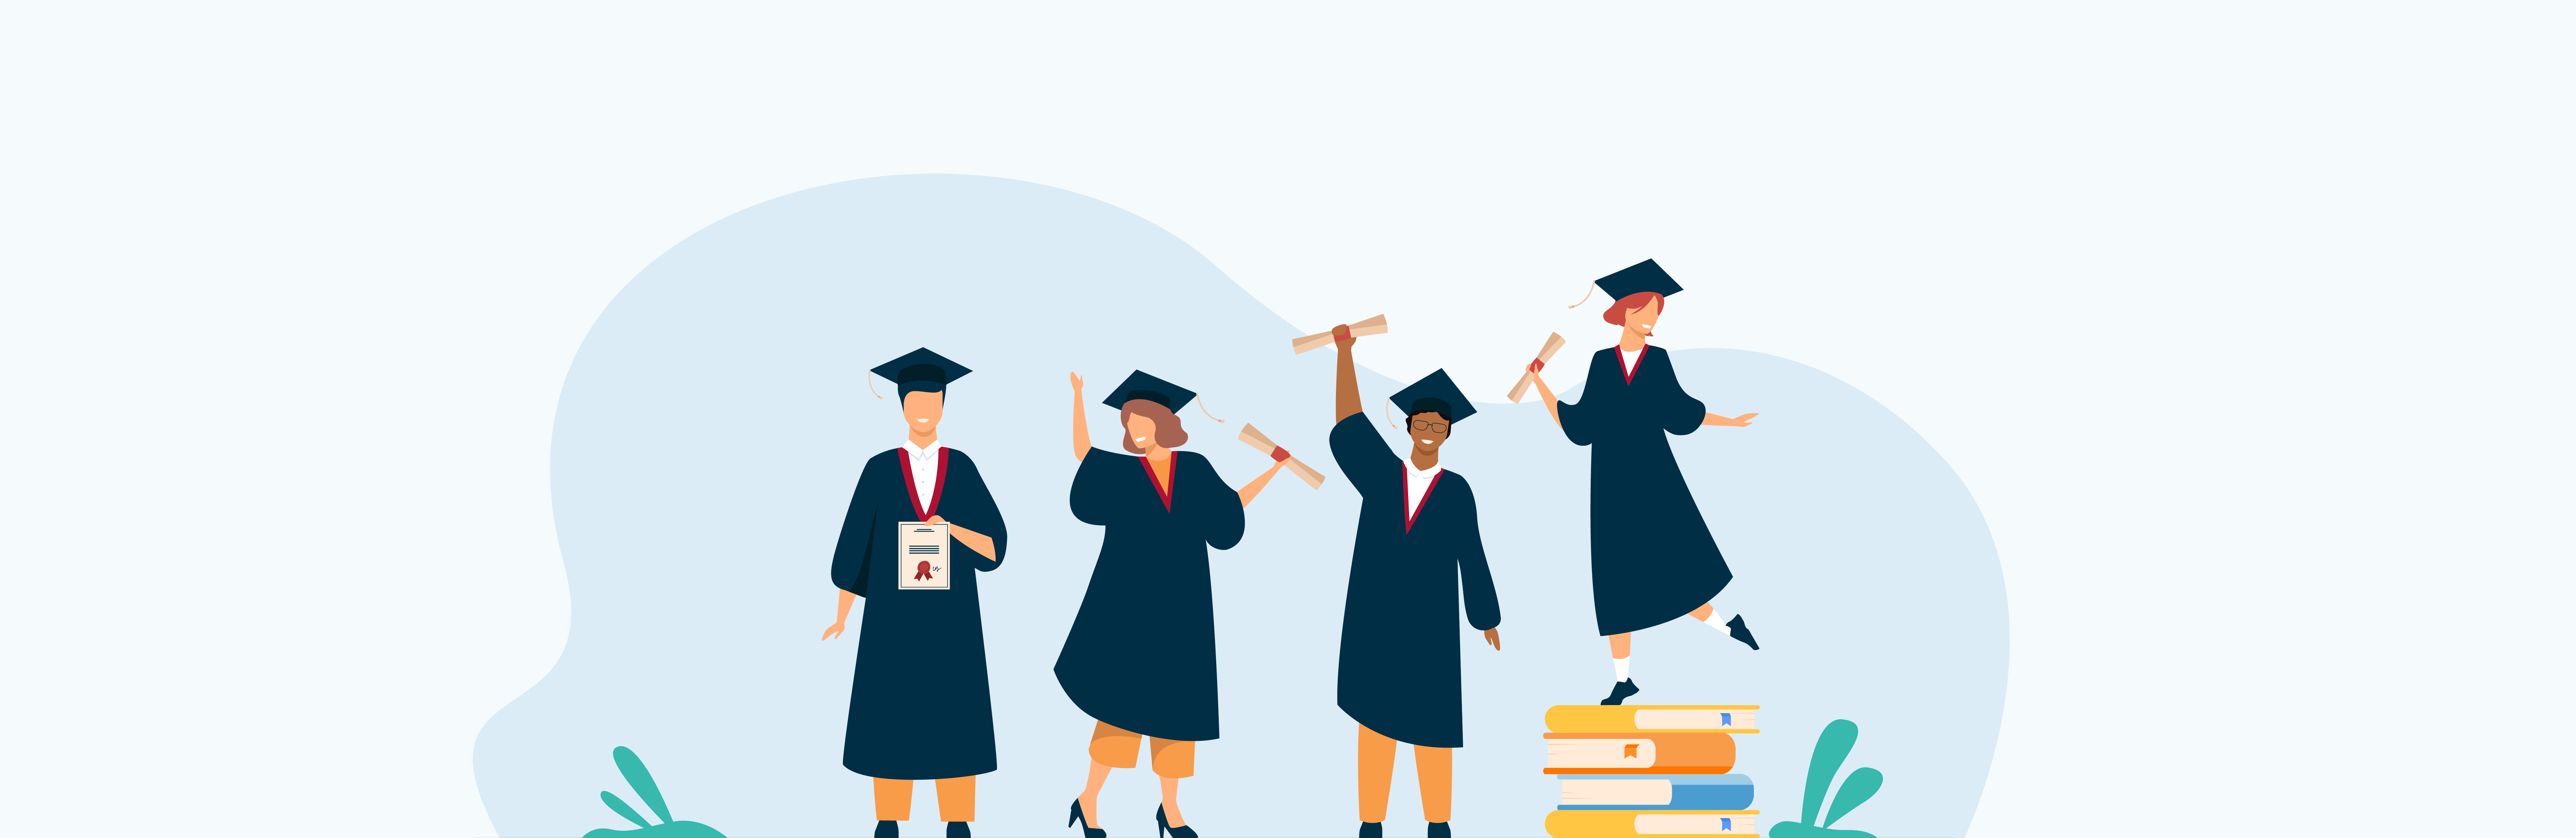 Illustrated students celebrating in graduation gowns and caps